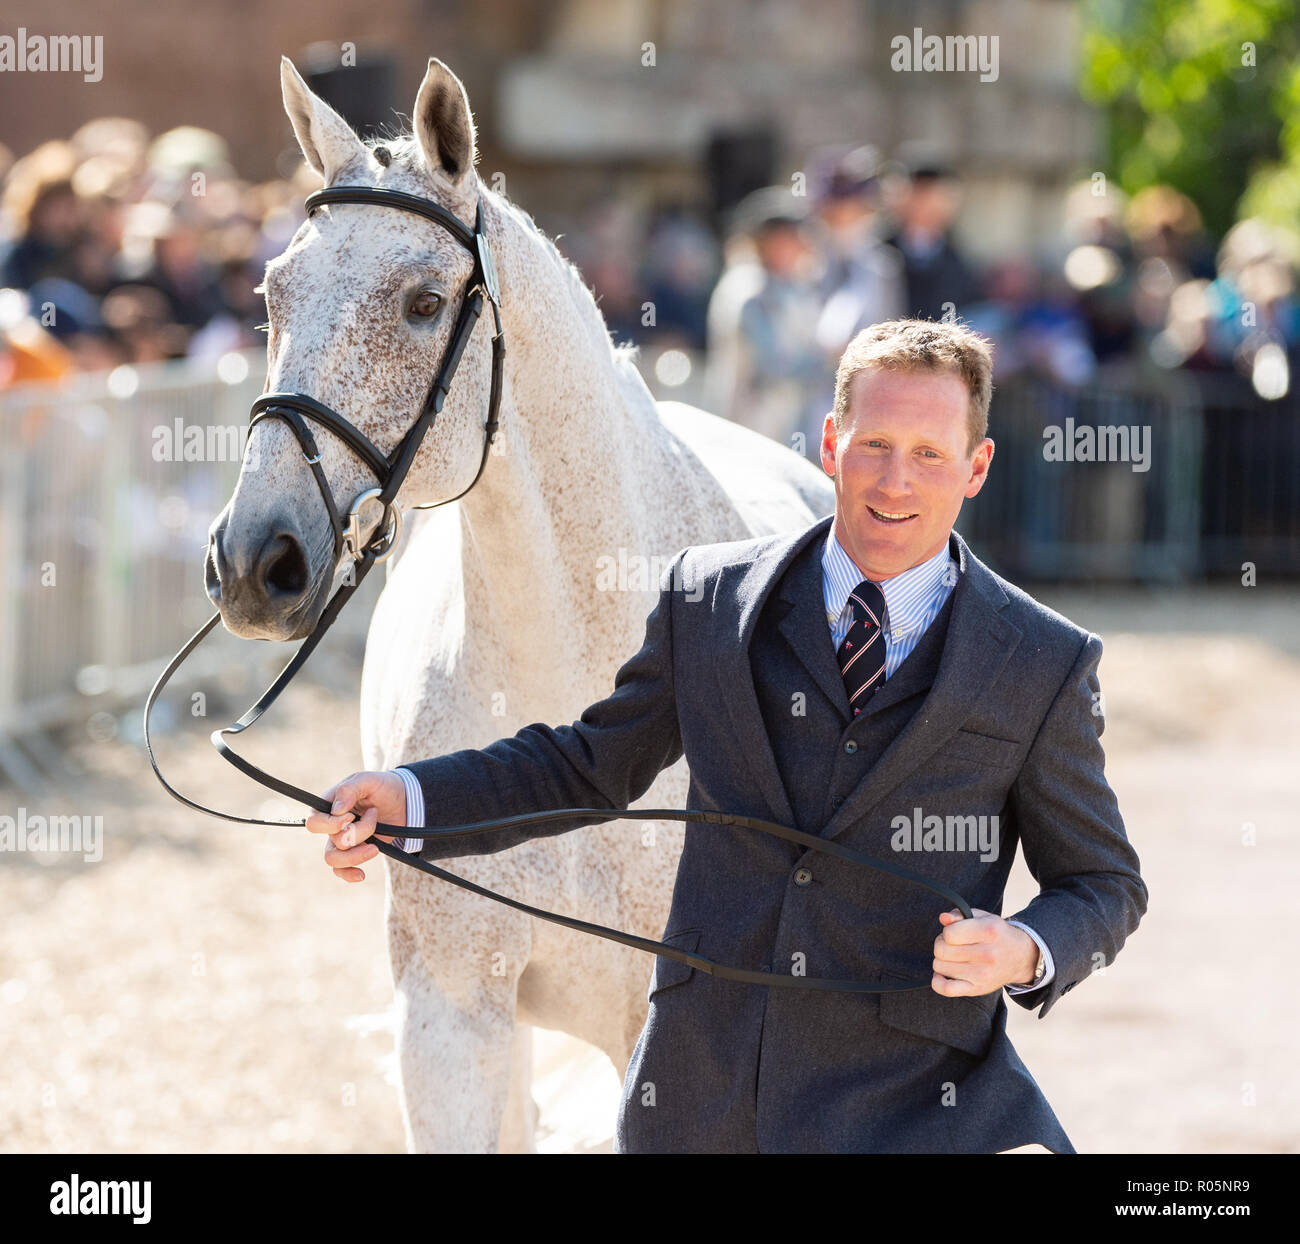 Oliver Townend and BALLAGHMOR CLASS during the vets inspection, Mitsubishi Motors Badminton Horse Trials, Badminton, Gloucestershire, 2018 Stock Photo